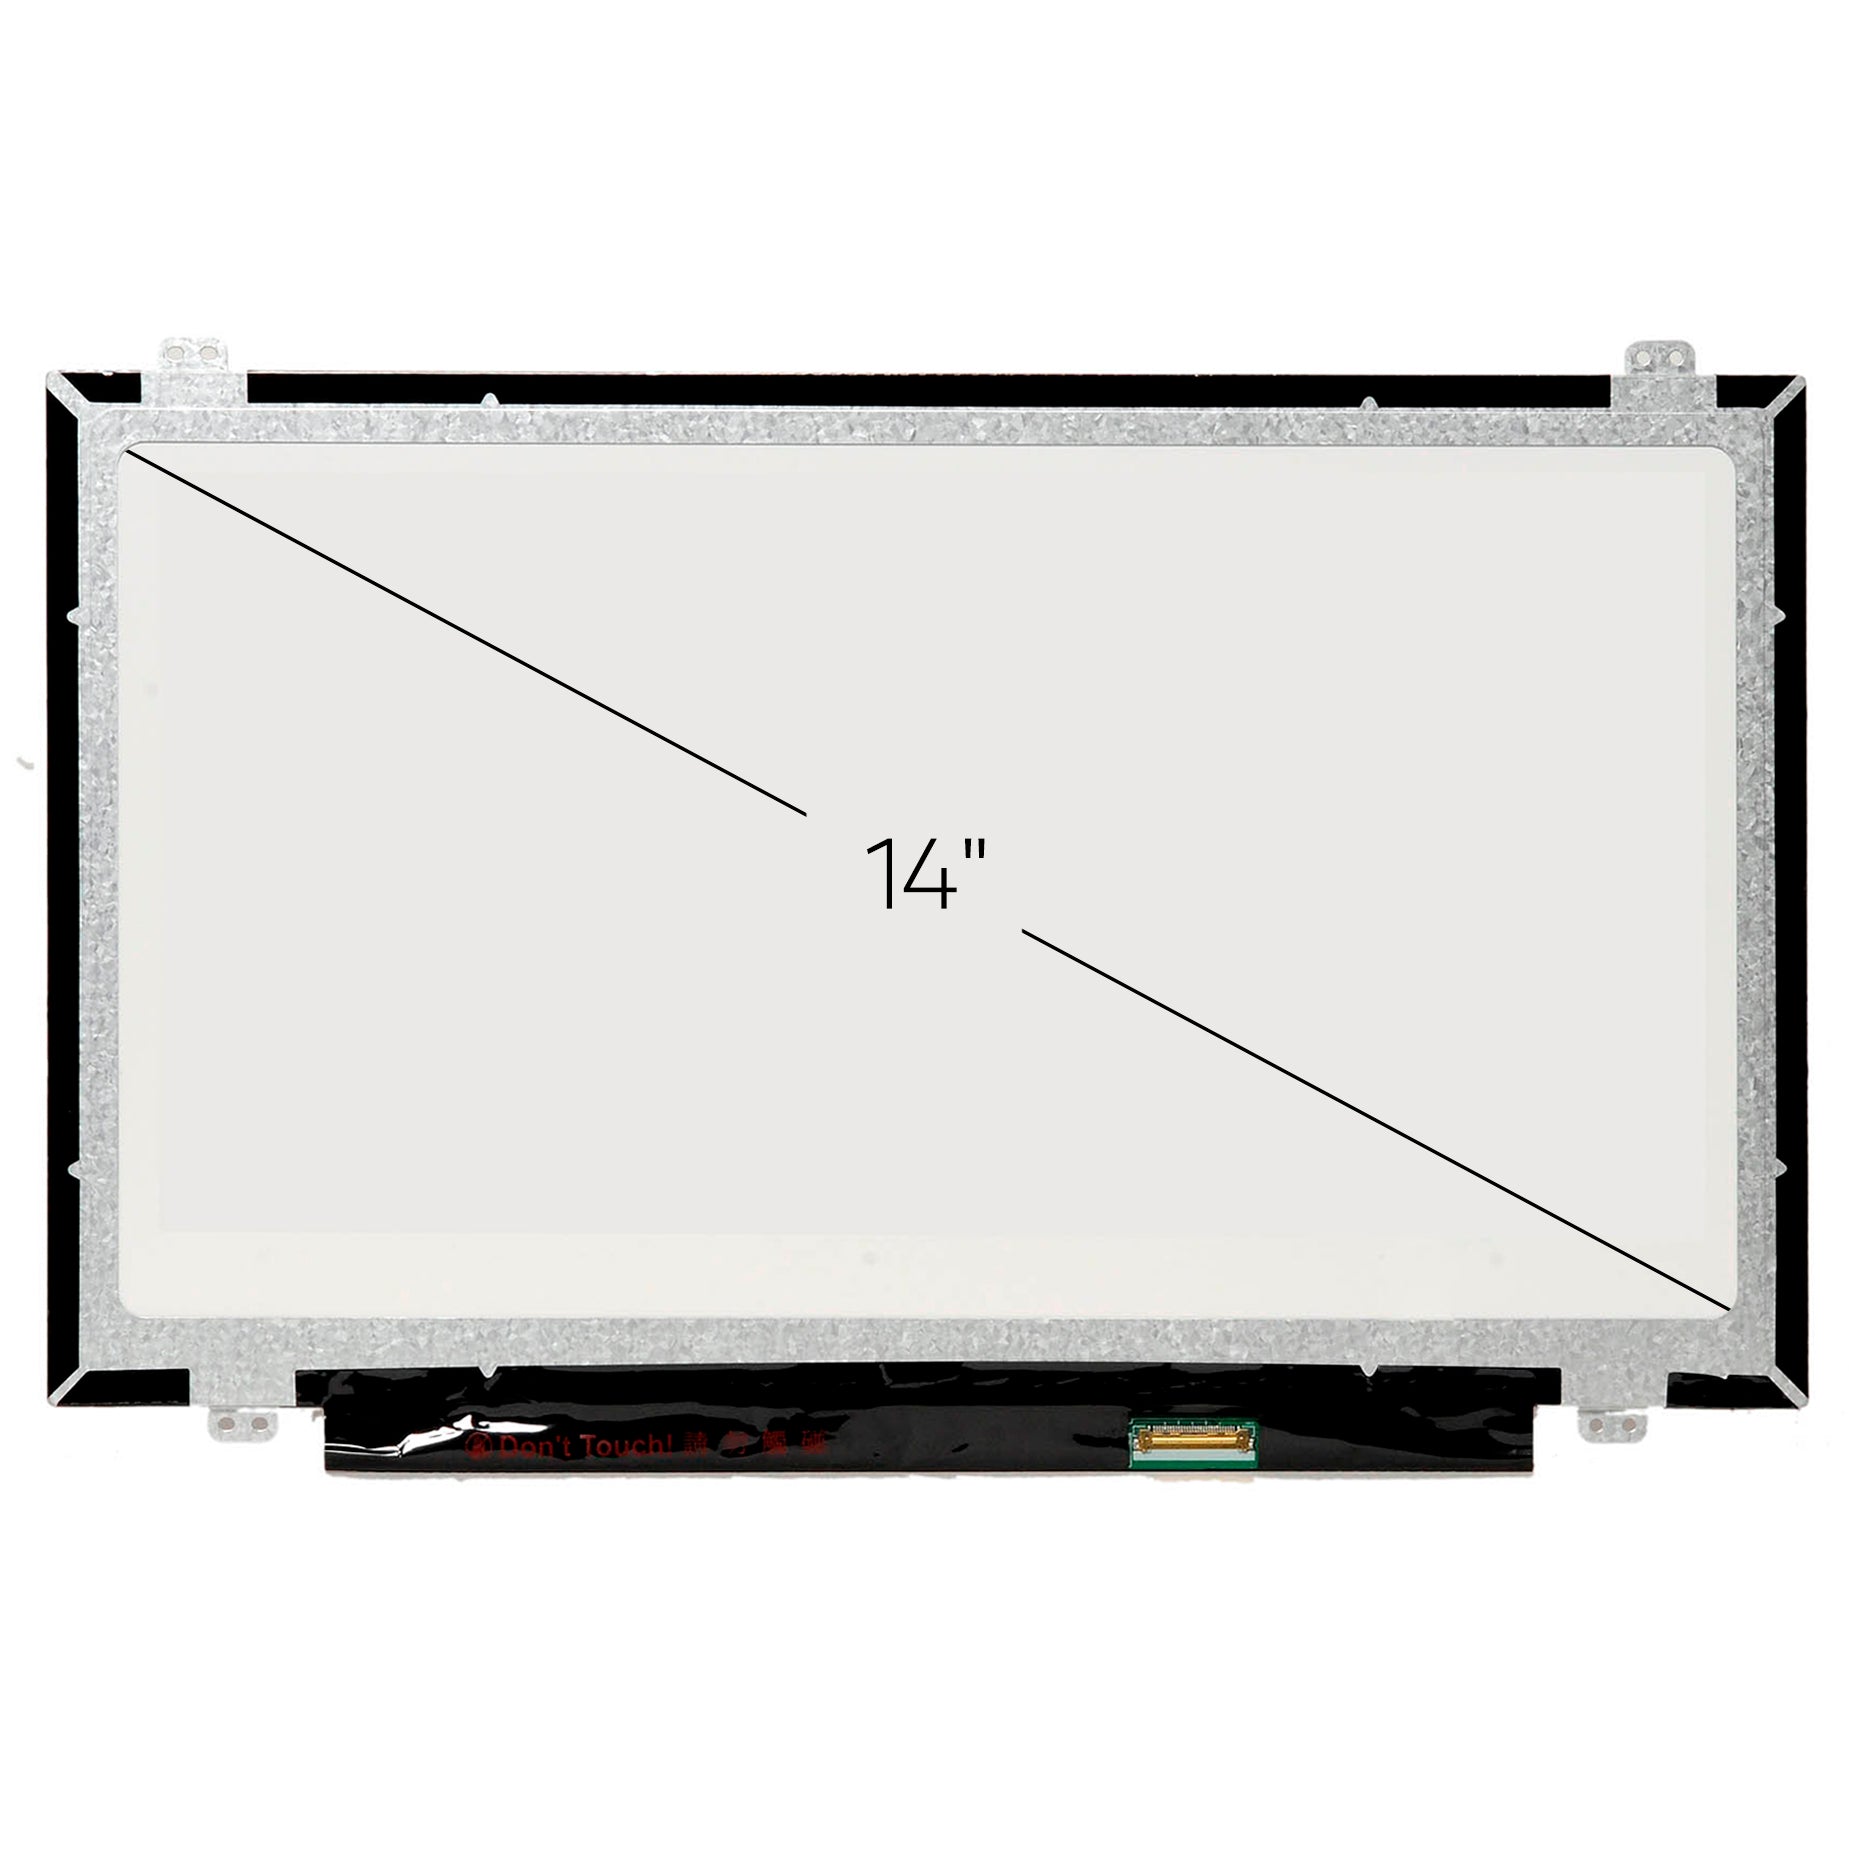 Screen Replacement for Lenovo Thinkpad E460 HD 1366x768 Glossy LCD LED Display